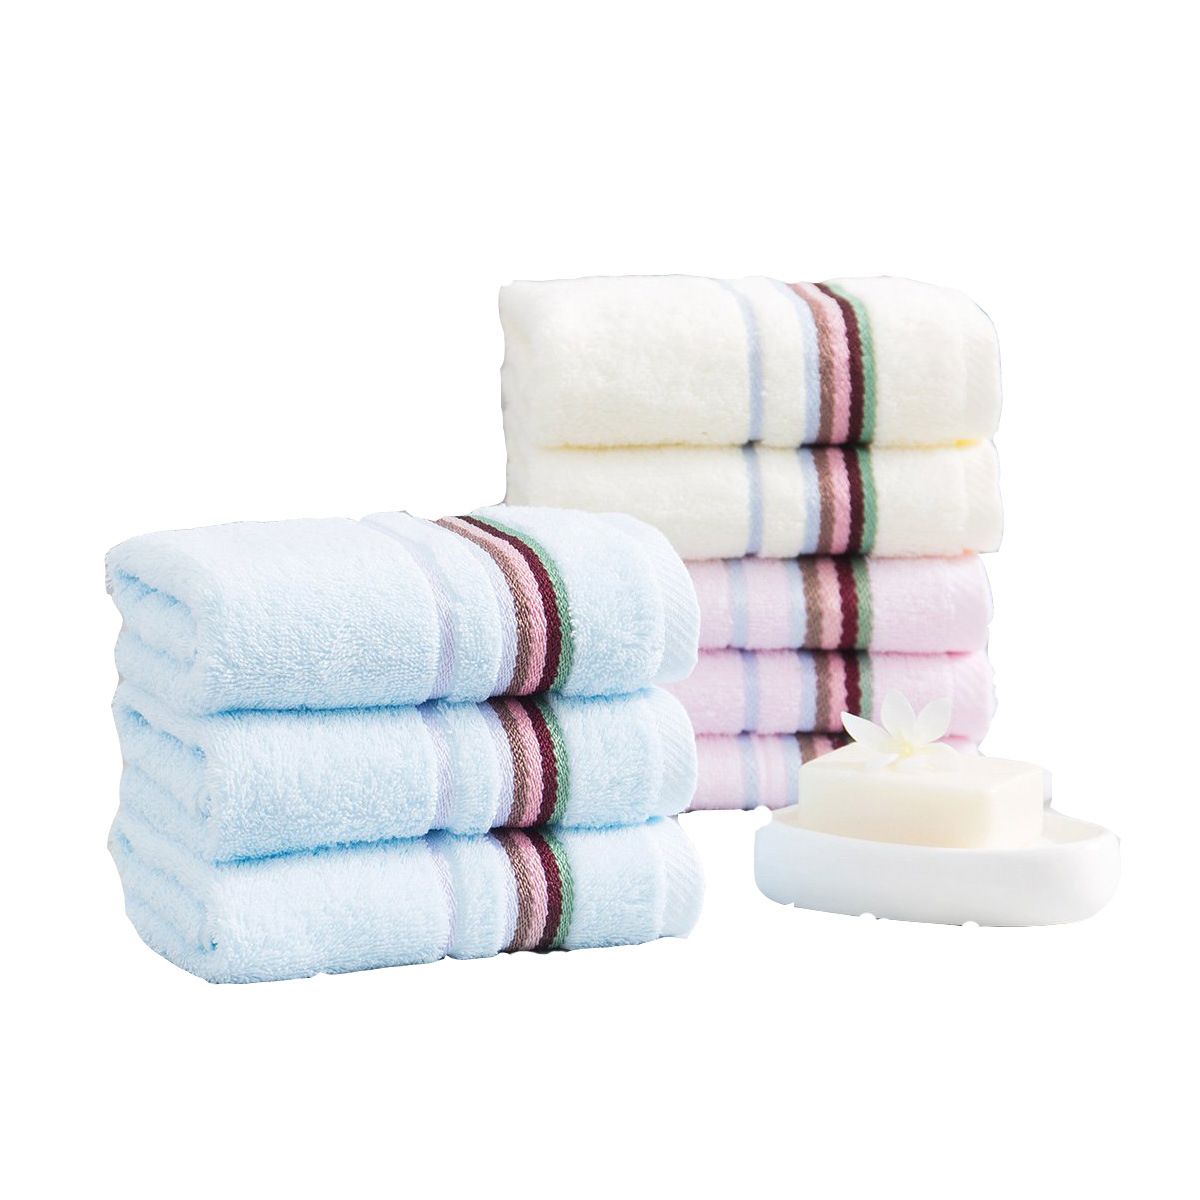 6638 Cotton Bath Towels, Plain Soft & Absorbent Bathroom Towels with Embroidery Logo